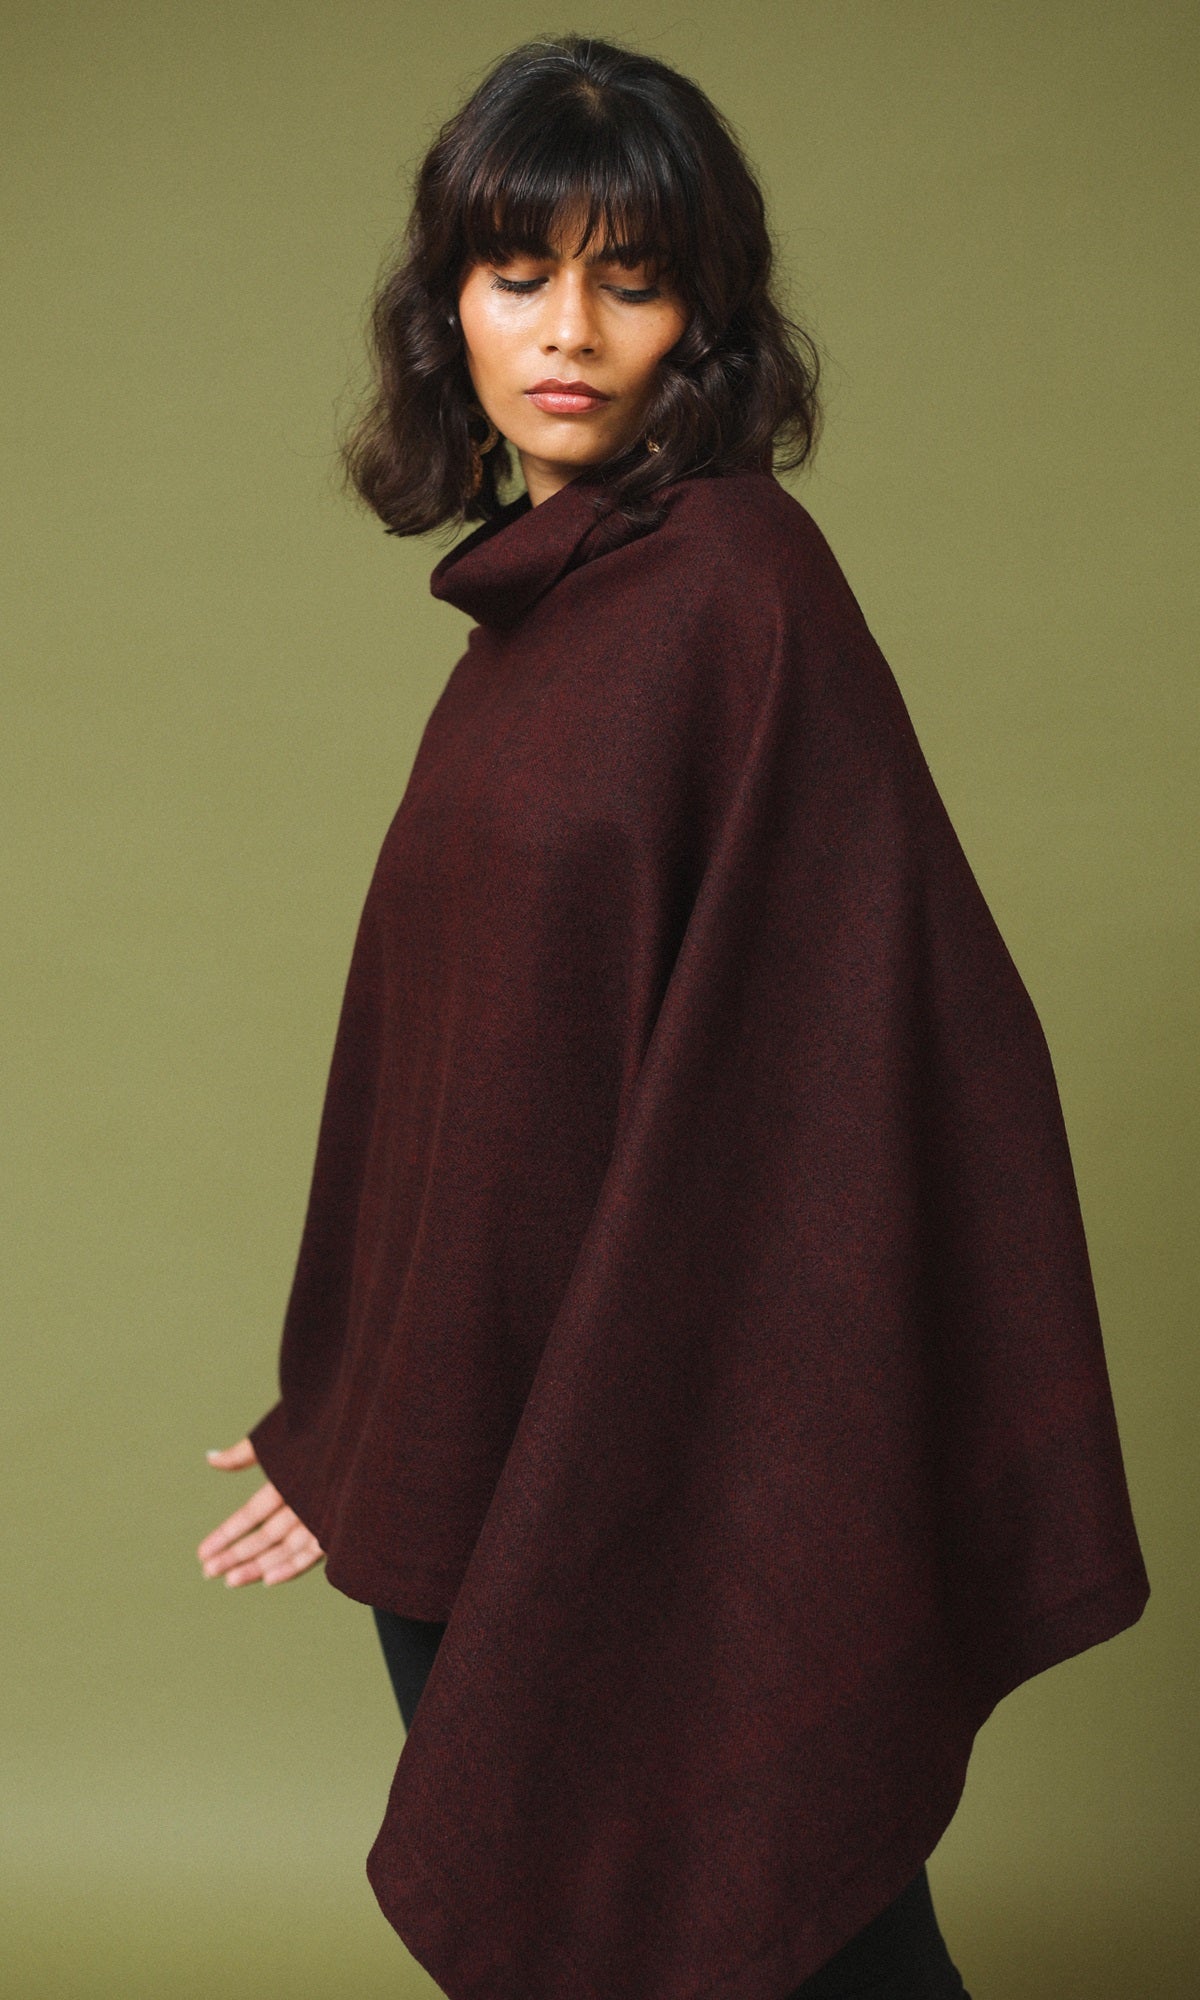 Meher Maroon and Black Handwoven Woollen Turtle Necked Poncho